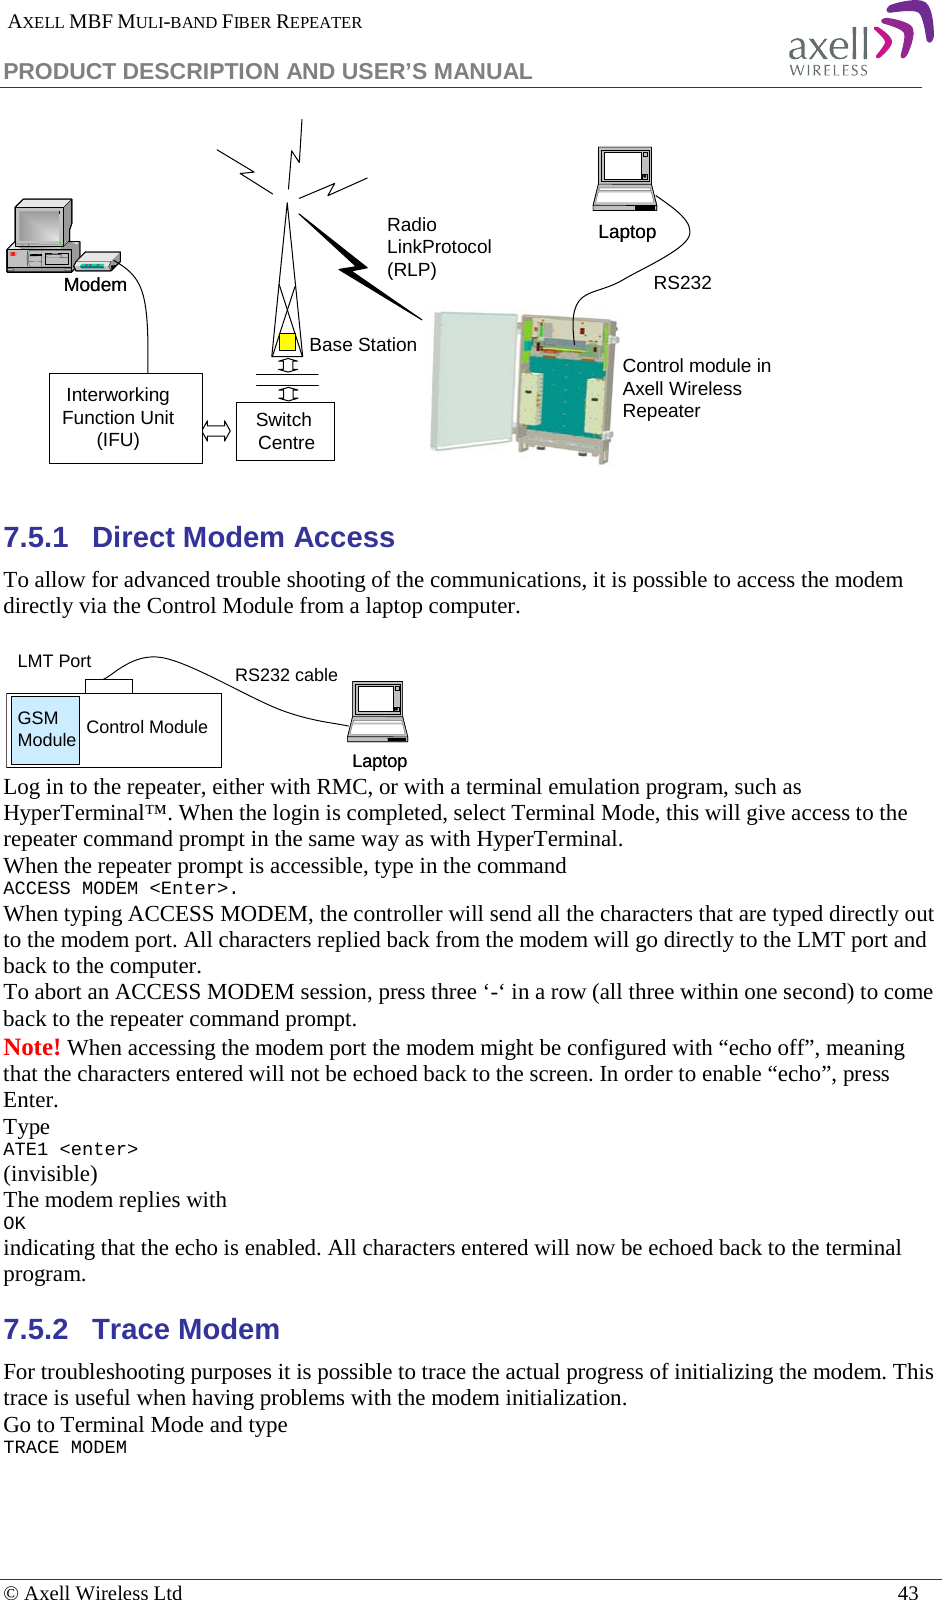  AXELL MBF MULI-BAND FIBER REPEATER PRODUCT DESCRIPTION AND USER’S MANUAL   © Axell Wireless Ltd    43   7.5.1  Direct Modem Access To allow for advanced trouble shooting of the communications, it is possible to access the modem directly via the Control Module from a laptop computer.    Log in to the repeater, either with RMC, or with a terminal emulation program, such as HyperTerminal™. When the login is completed, select Terminal Mode, this will give access to the repeater command prompt in the same way as with HyperTerminal. When the repeater prompt is accessible, type in the command  ACCESS MODEM &lt;Enter&gt;.  When typing ACCESS MODEM, the controller will send all the characters that are typed directly out to the modem port. All characters replied back from the modem will go directly to the LMT port and back to the computer. To abort an ACCESS MODEM session, press three ‘-‘ in a row (all three within one second) to come back to the repeater command prompt. Note! When accessing the modem port the modem might be configured with “echo off”, meaning that the characters entered will not be echoed back to the screen. In order to enable “echo”, press Enter.  Type  ATE1 &lt;enter&gt; (invisible)  The modem replies with OK indicating that the echo is enabled. All characters entered will now be echoed back to the terminal program. 7.5.2  Trace Modem For troubleshooting purposes it is possible to trace the actual progress of initializing the modem. This trace is useful when having problems with the modem initialization. Go to Terminal Mode and type TRACE MODEM  Radio LinkProtocol(RLP)Base StationLaptopLaptopControl module in Axell Wireless  RepeaterSwitch CentreModemModem RS232InterworkingFunction Unit(IFU)LaptopLaptopRS232 cableControl ModuleGSM ModuleLMT Port